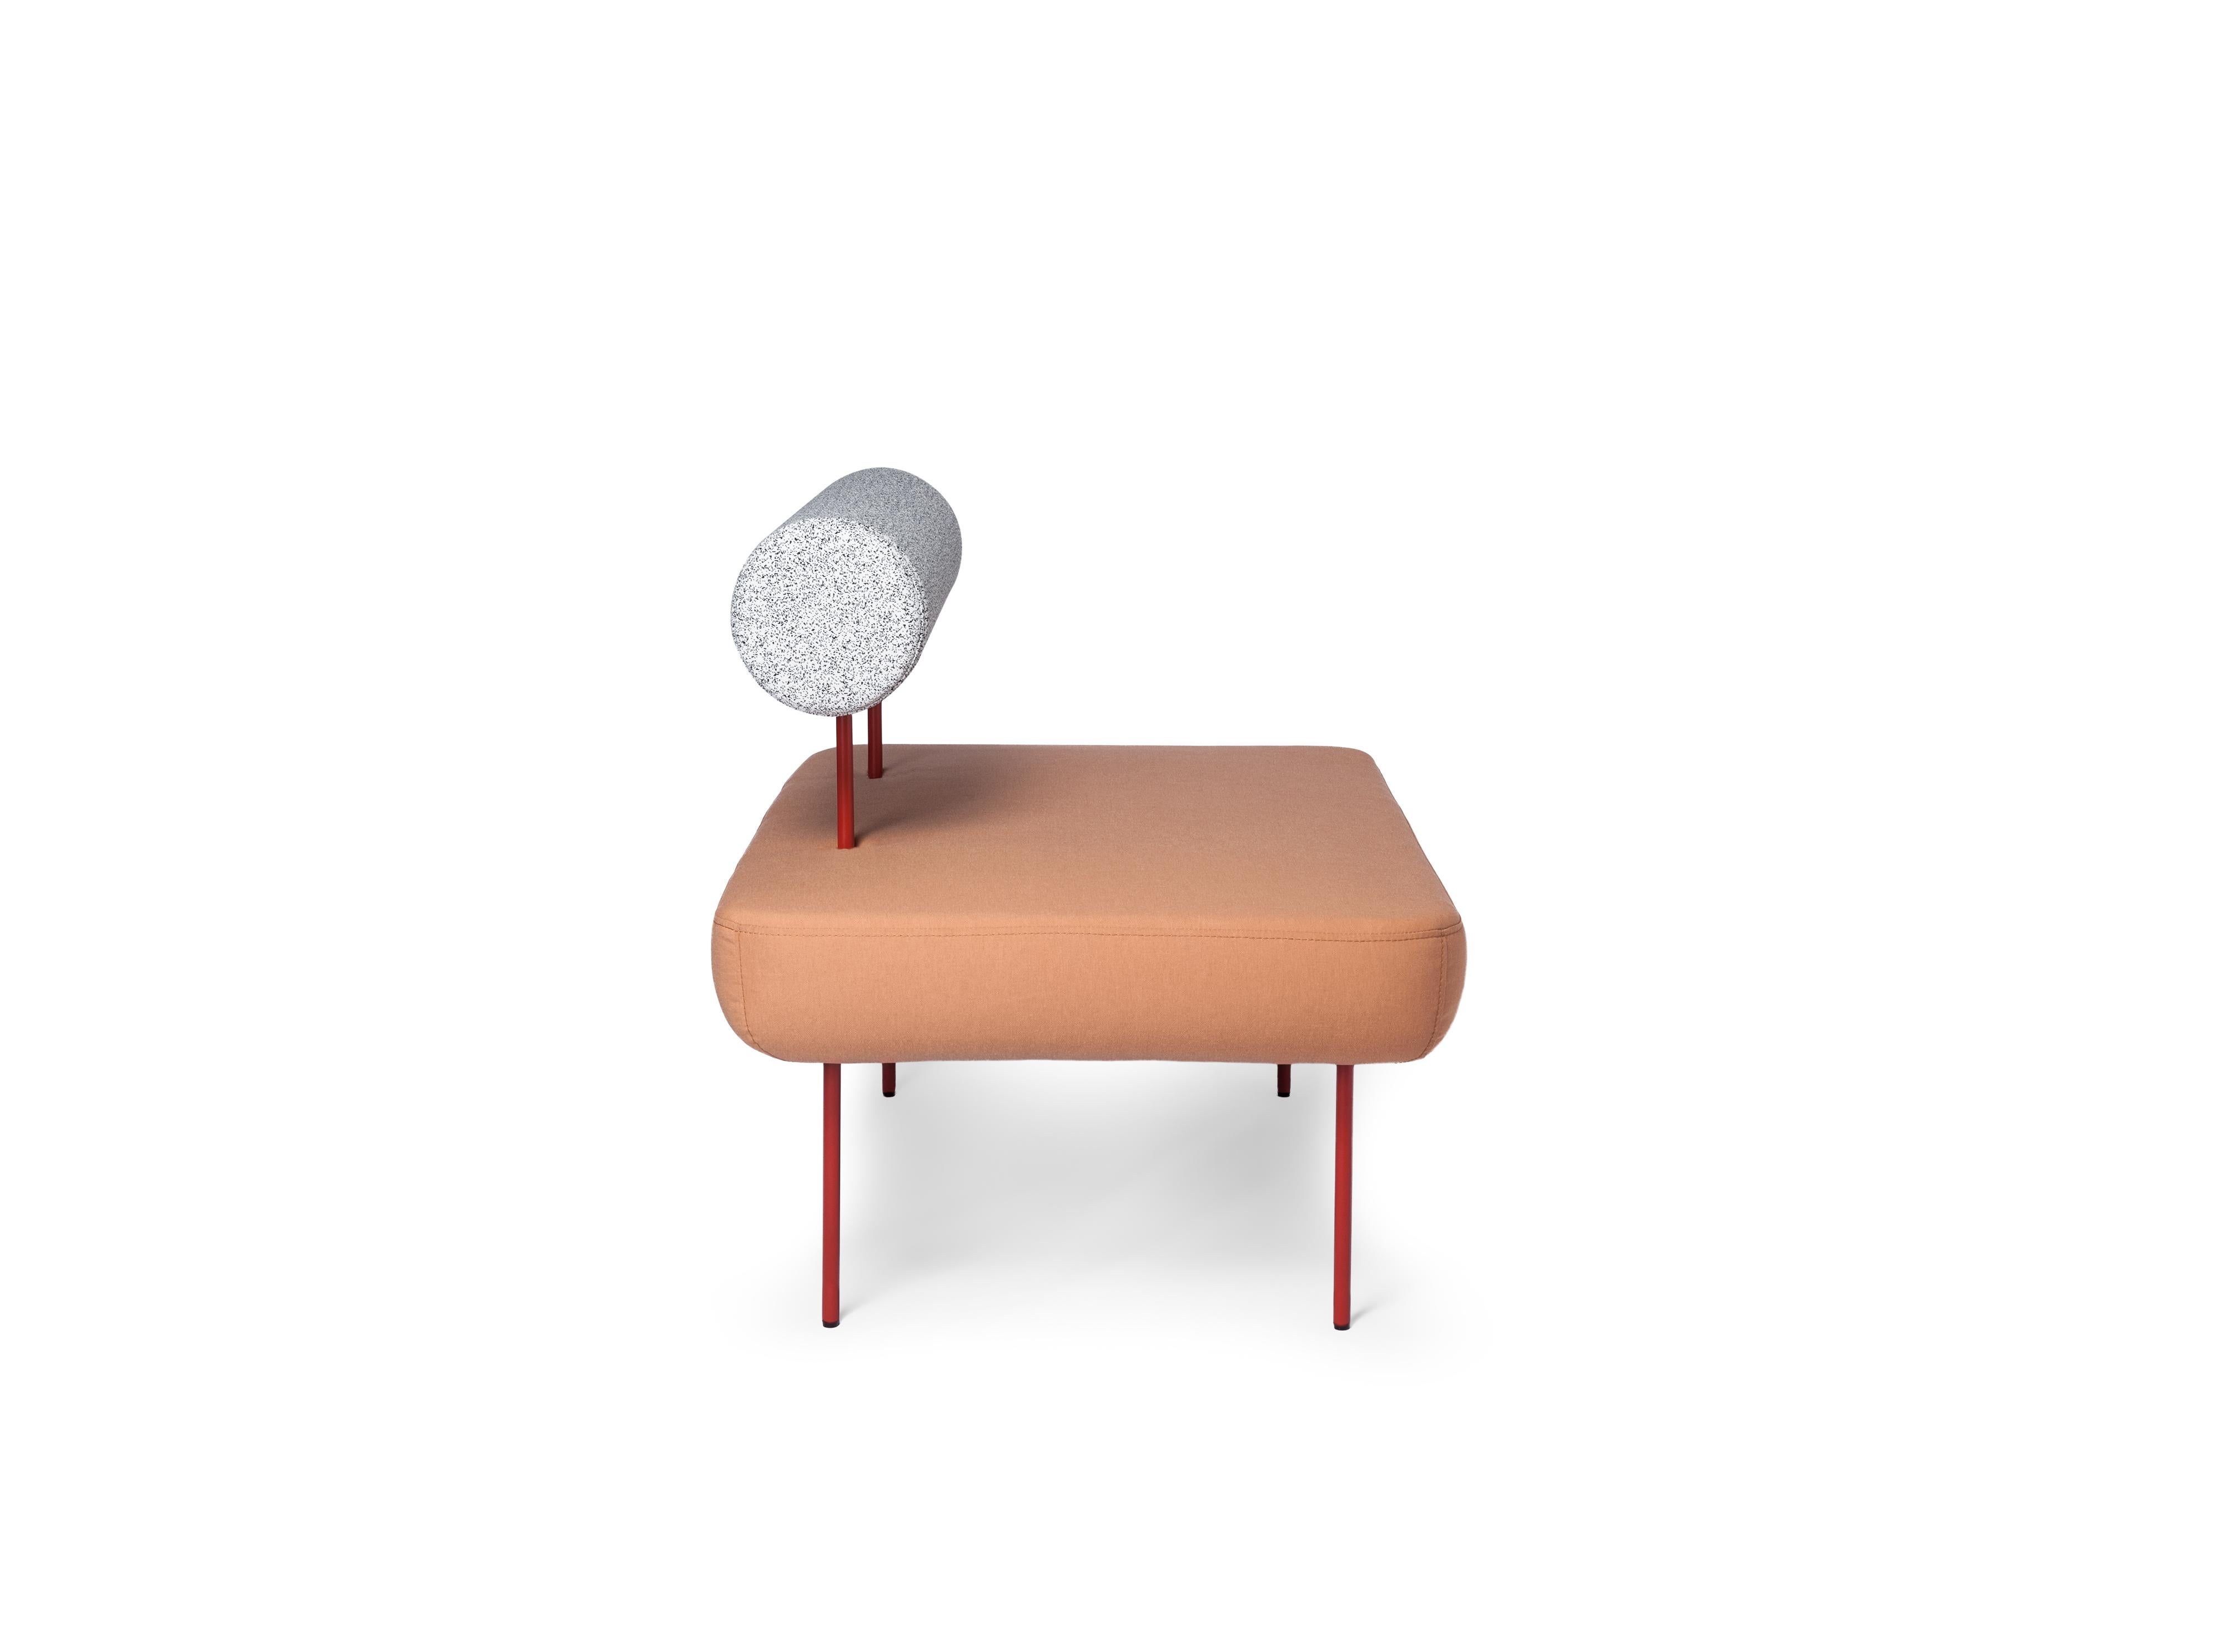 Petite Friture Large Hoff Armchair in Peach by Morten & Jonas, 2015

Hoff created by designer duo Morten & Jonas is a collection of two modular stools and two modular armchairs. they can combine to make a sofa as well an entire living room area.